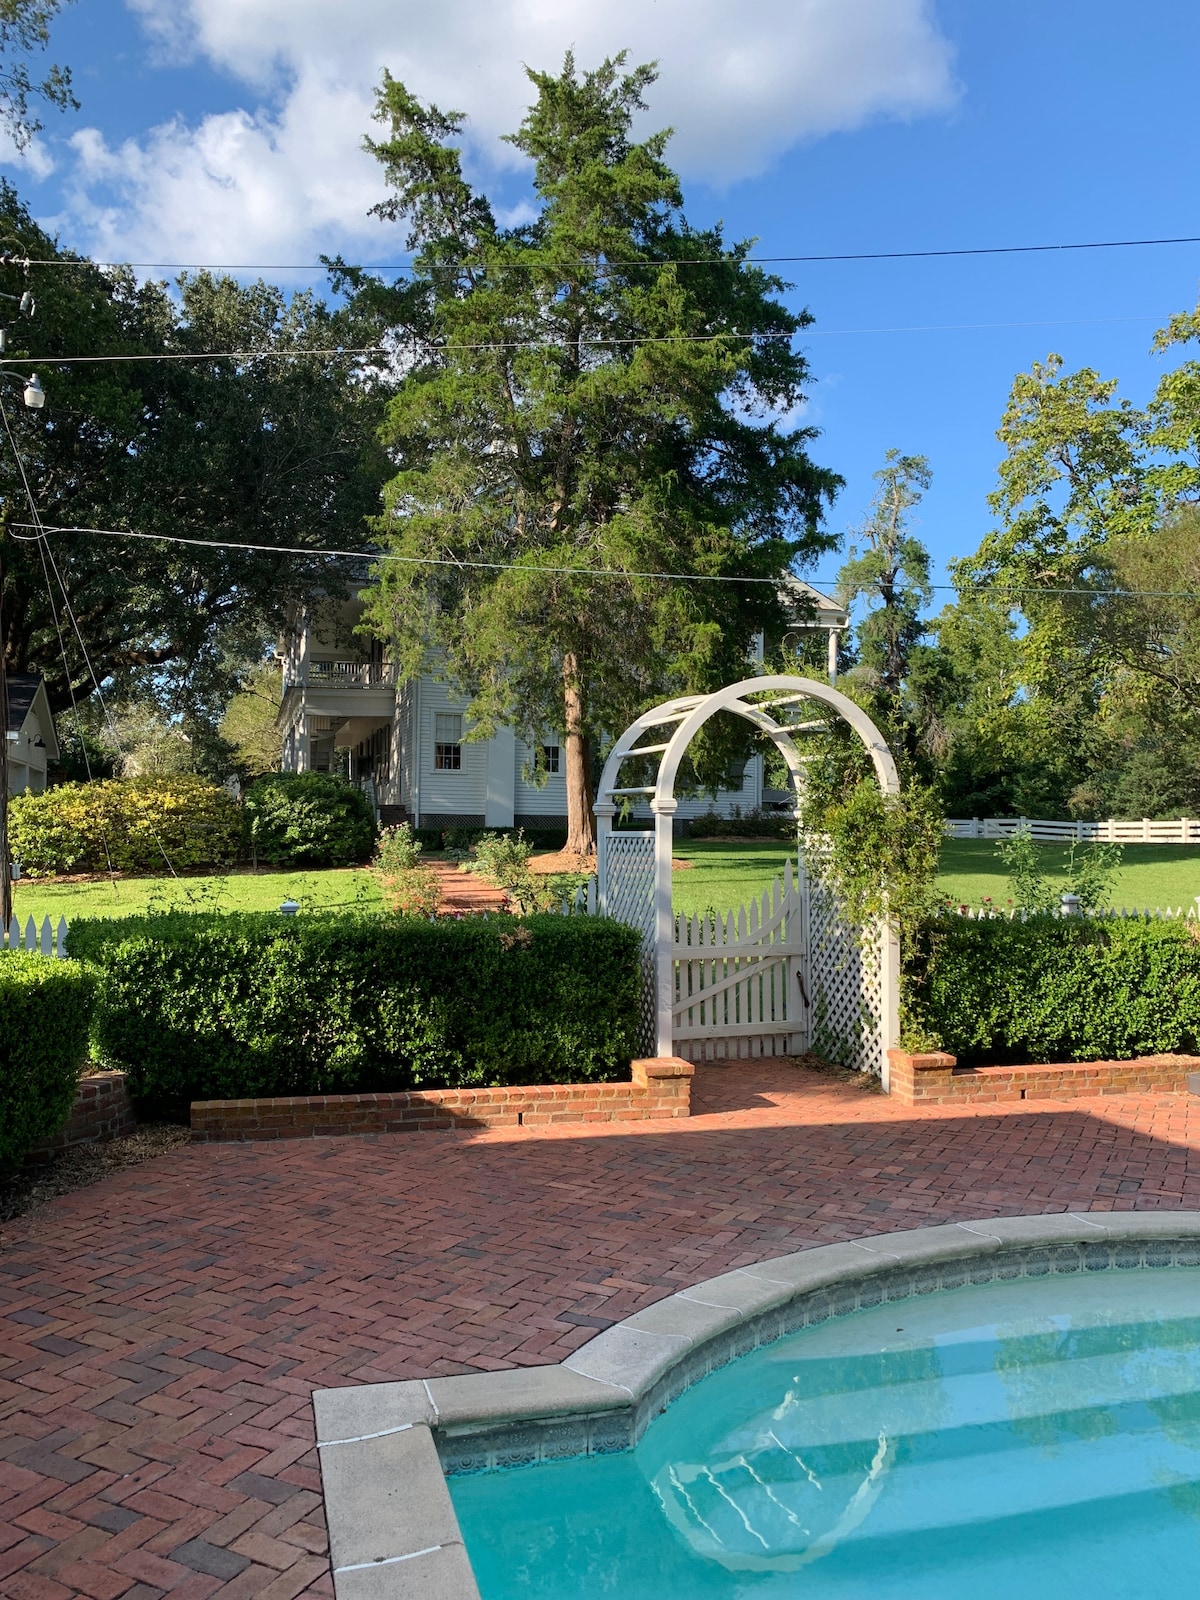 Pool House on grounds of Historic Ravenna Mansion